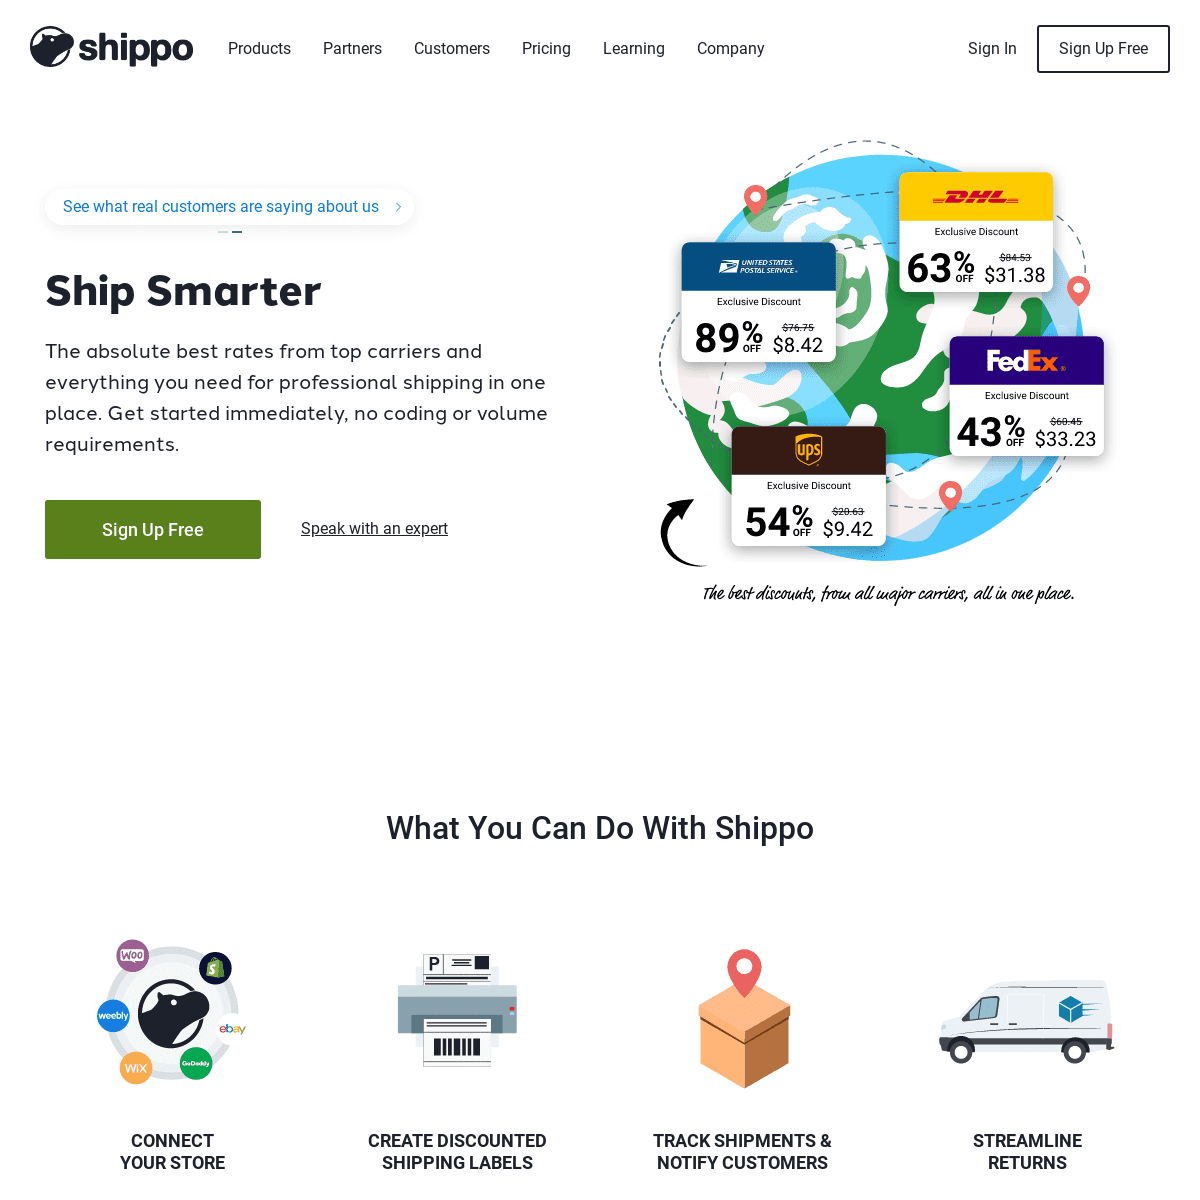 A complete backup of https://goshippo.com